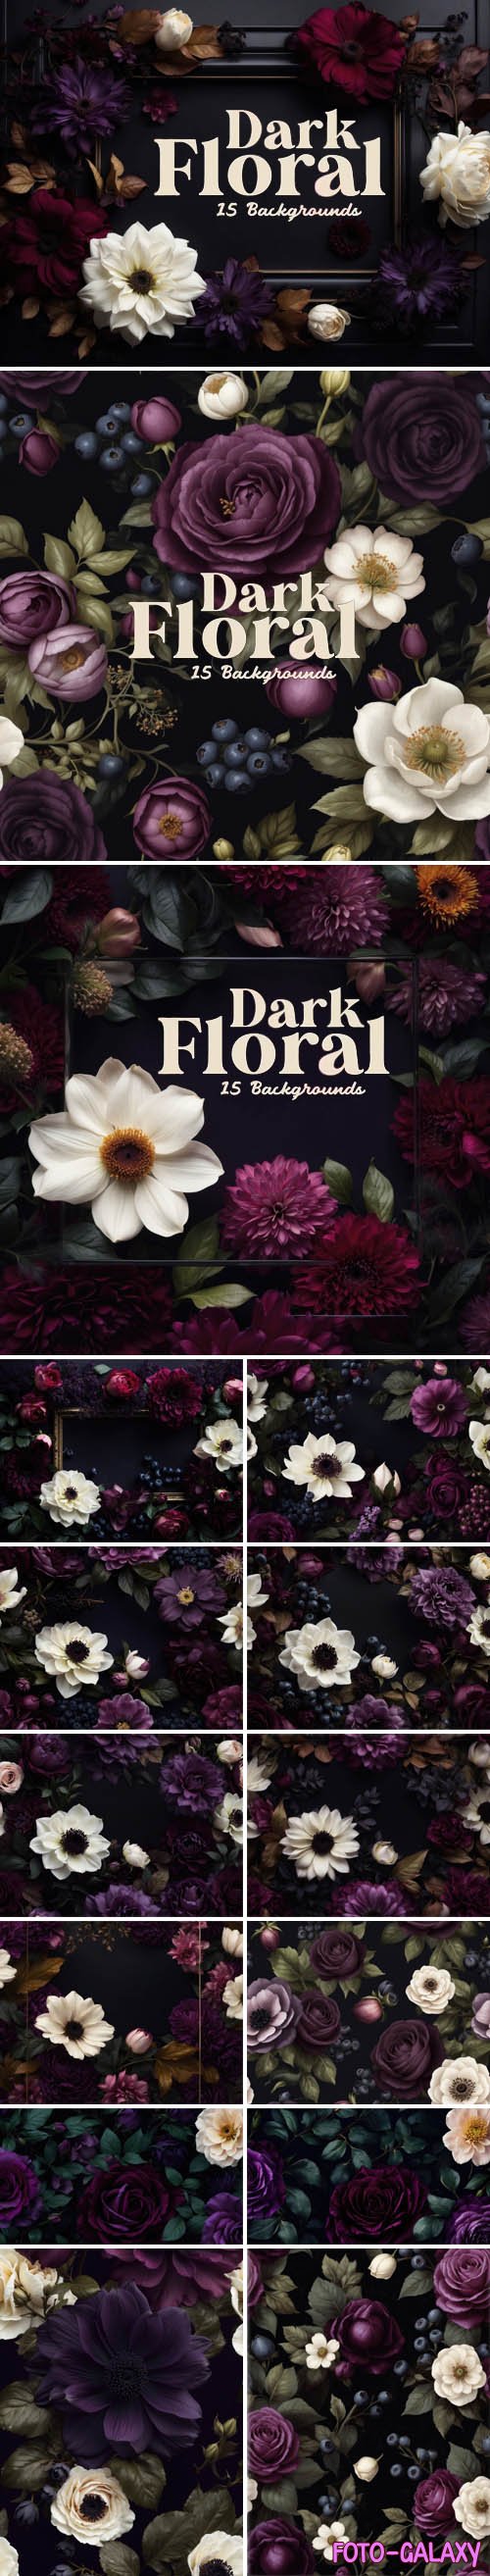 15 Dark Floral Backgrounds Collection